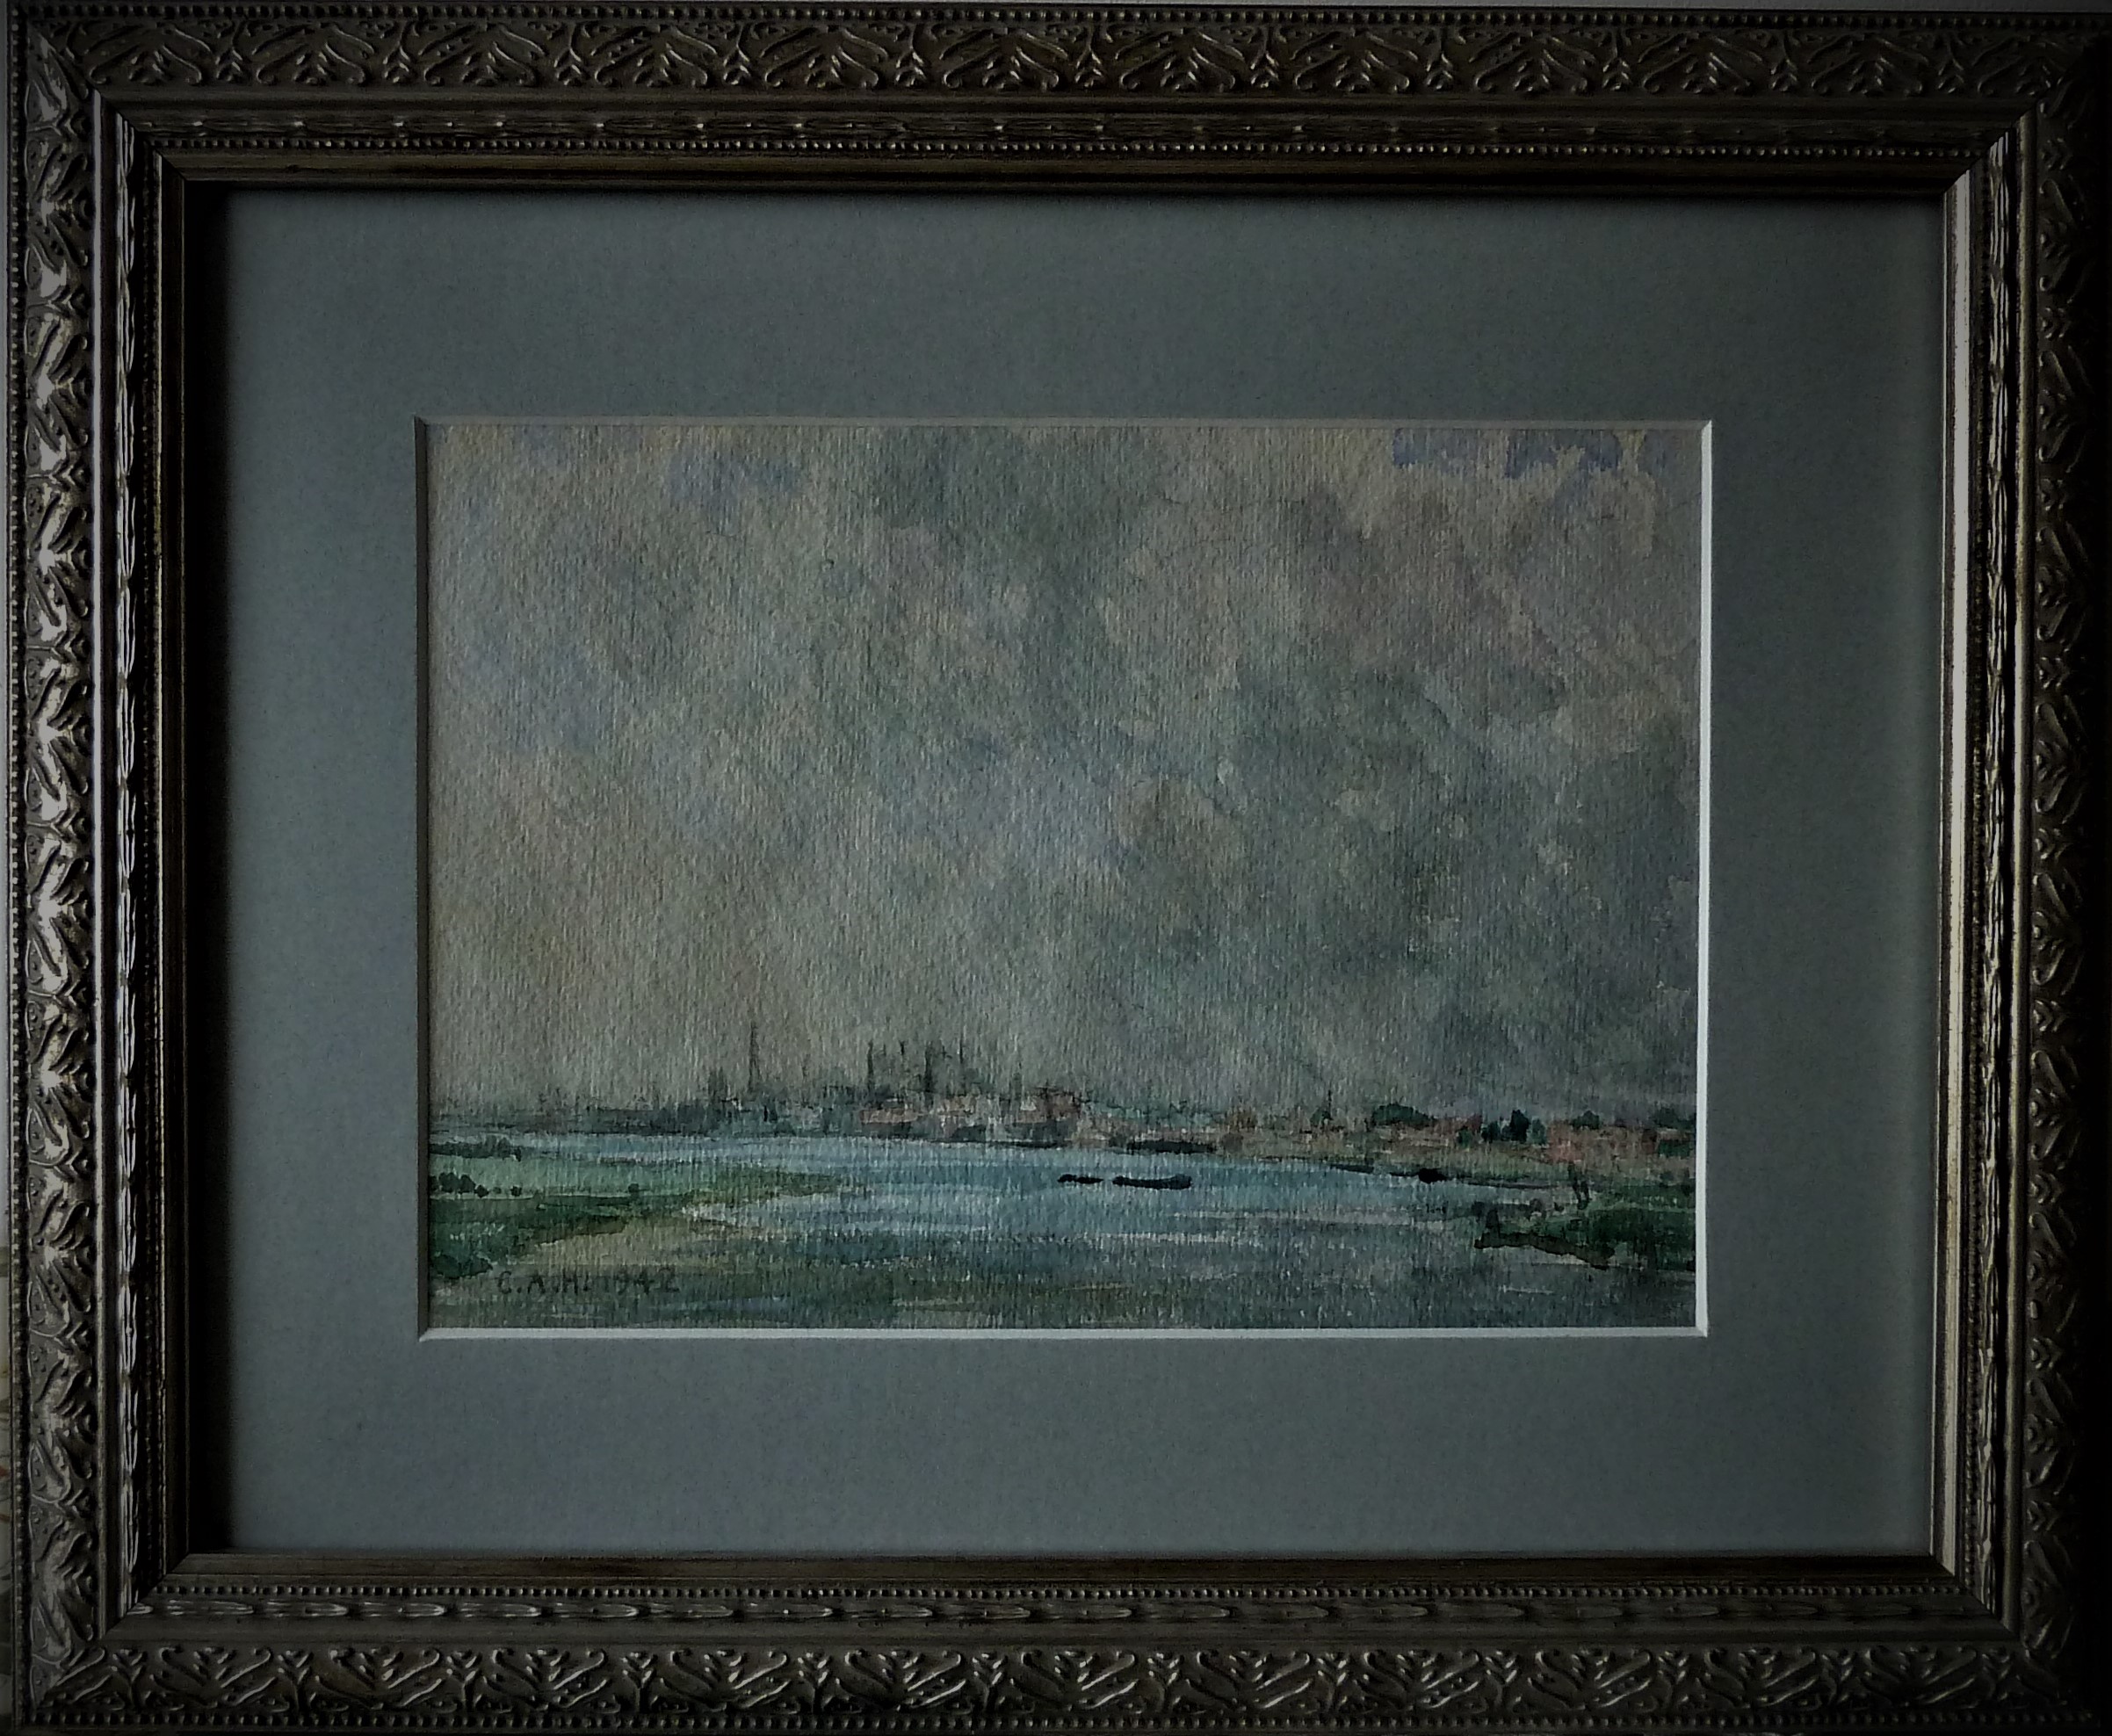 Charles Arthur Hannaford (1887 - 1972)  
Member of the Royal Society of British Artists.Watercolour of Kings Lynn by Charles Arthur Hannaford R.B.A. (1887-1972) framed with art glass UV
Charles A Hannaford founded Broads Tours in Norfolk and exhibited and sold from the Broads Tours tearooms. 
Charles A Hannaford was educated at Devonport High School and studied art at Plymouth Art School.
 He settled in Wroxham,Norfolk.  Many of his painting were illustrated in the small booklet he produced entitled “The Charm of the Norfolk Broads”. 
His work also achieved wider acclaim as he exhibited with the Royal Society of British Artists.
Charles A Hannaford painted right up to his death on 8th August 1972 age 85
